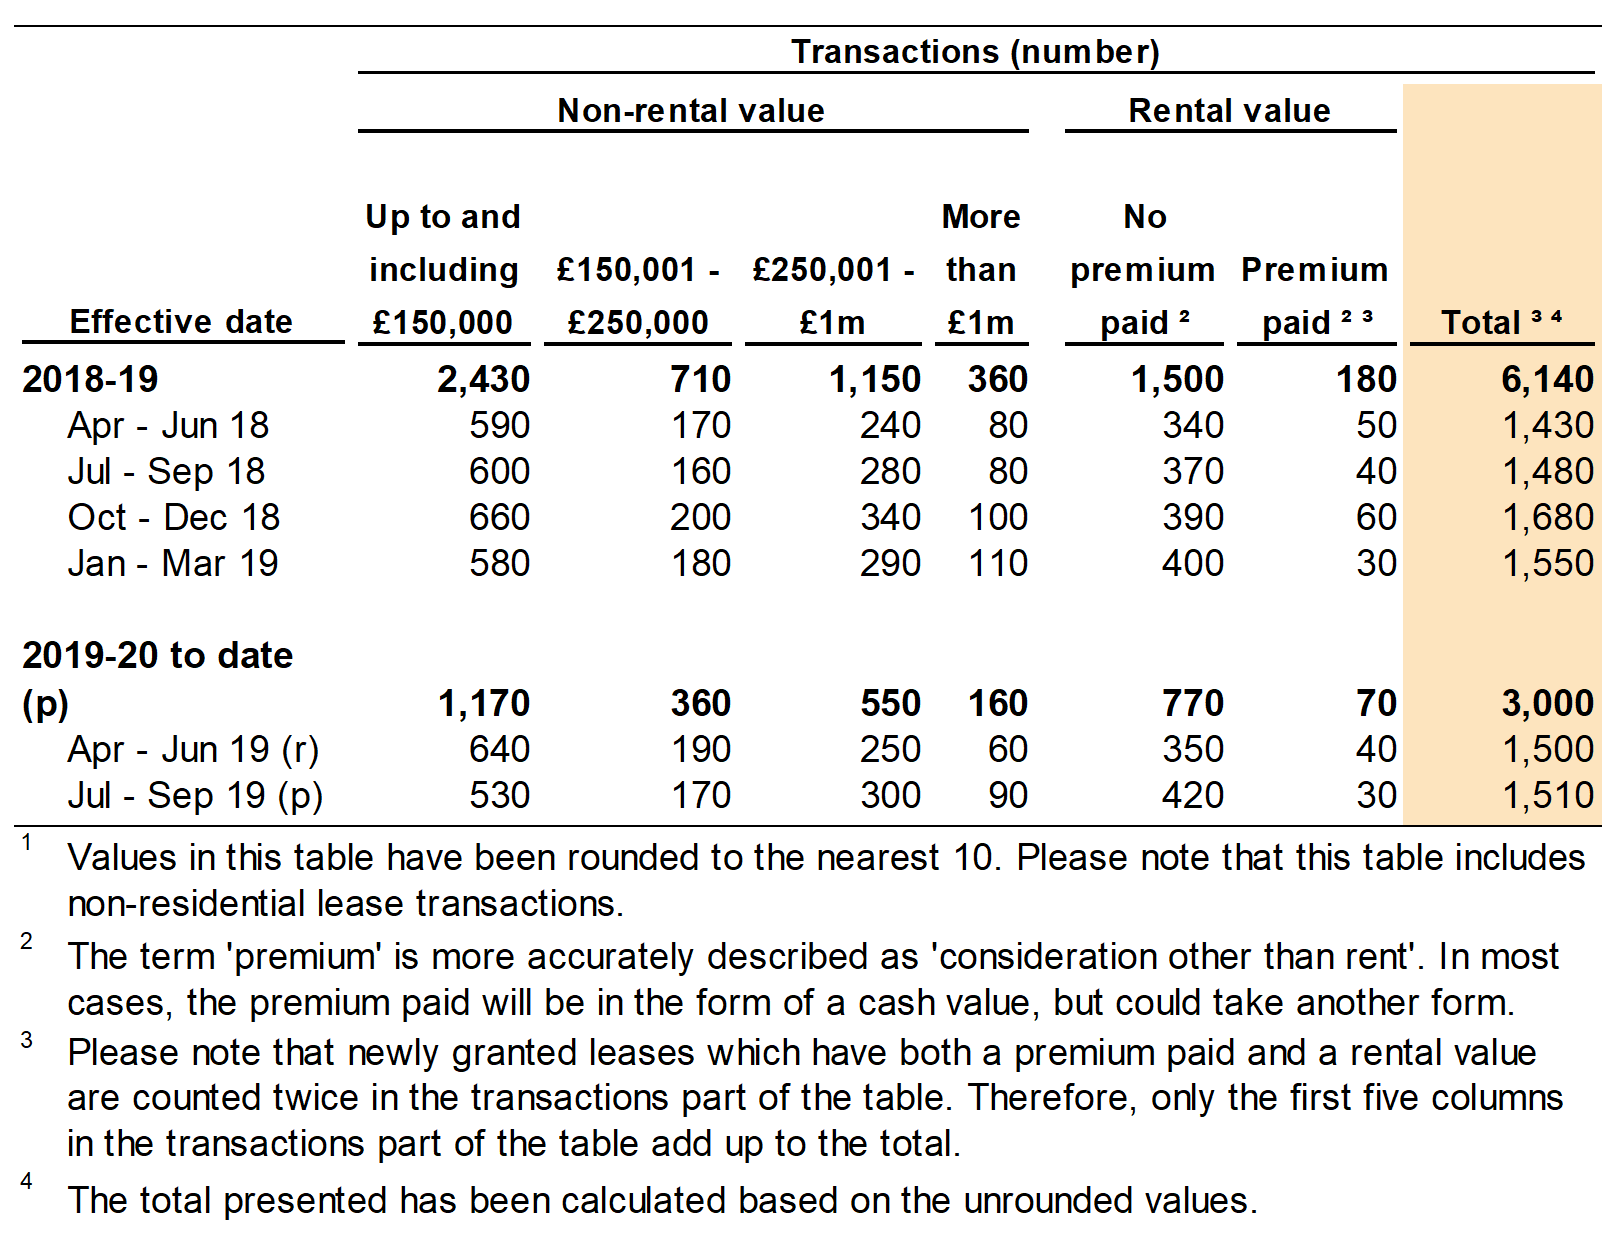 Figure 4.1 shows the number of non-residential transactions by value of the property. Data is shown for the year and quarter in which the transaction was effective.